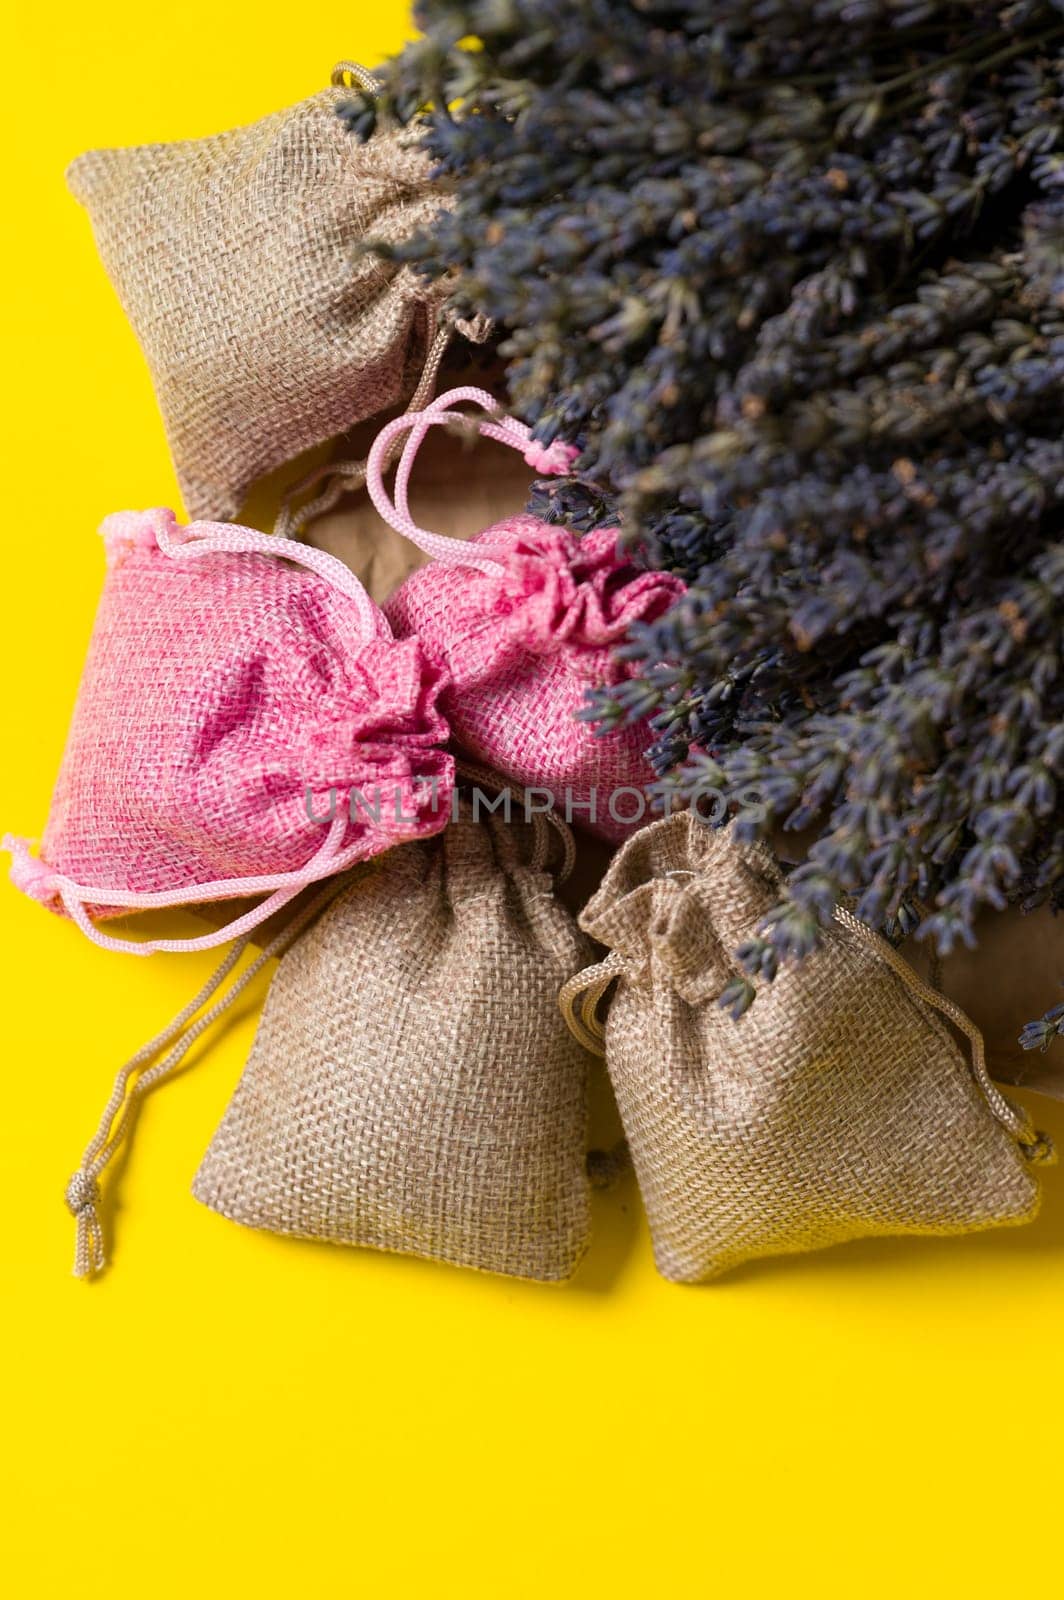 Dried lavender flowers and sachets on a yellow background. by Niko_Cingaryuk